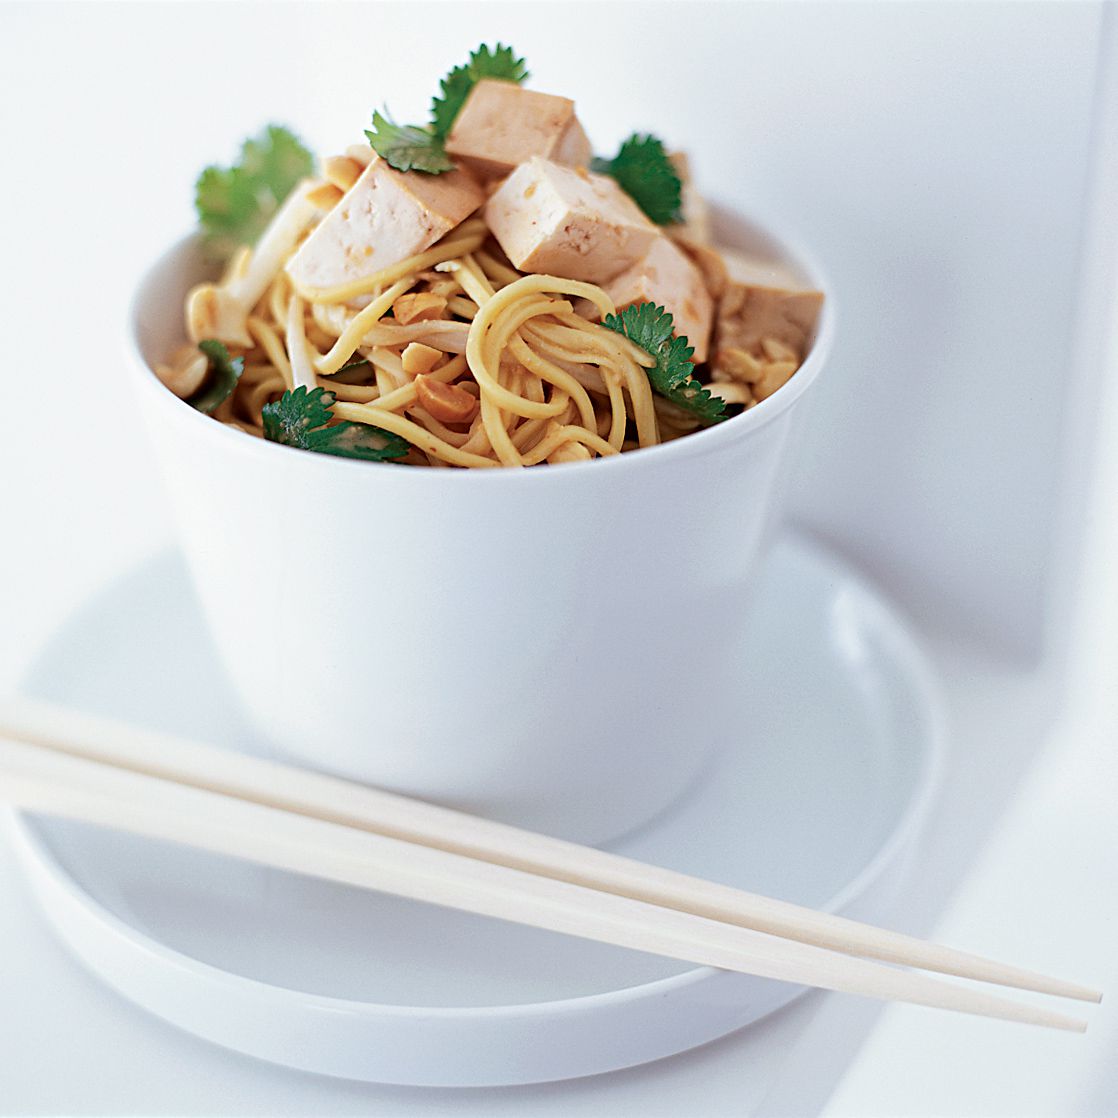 Cold Noodles with Tofu in Peanut Sauce 